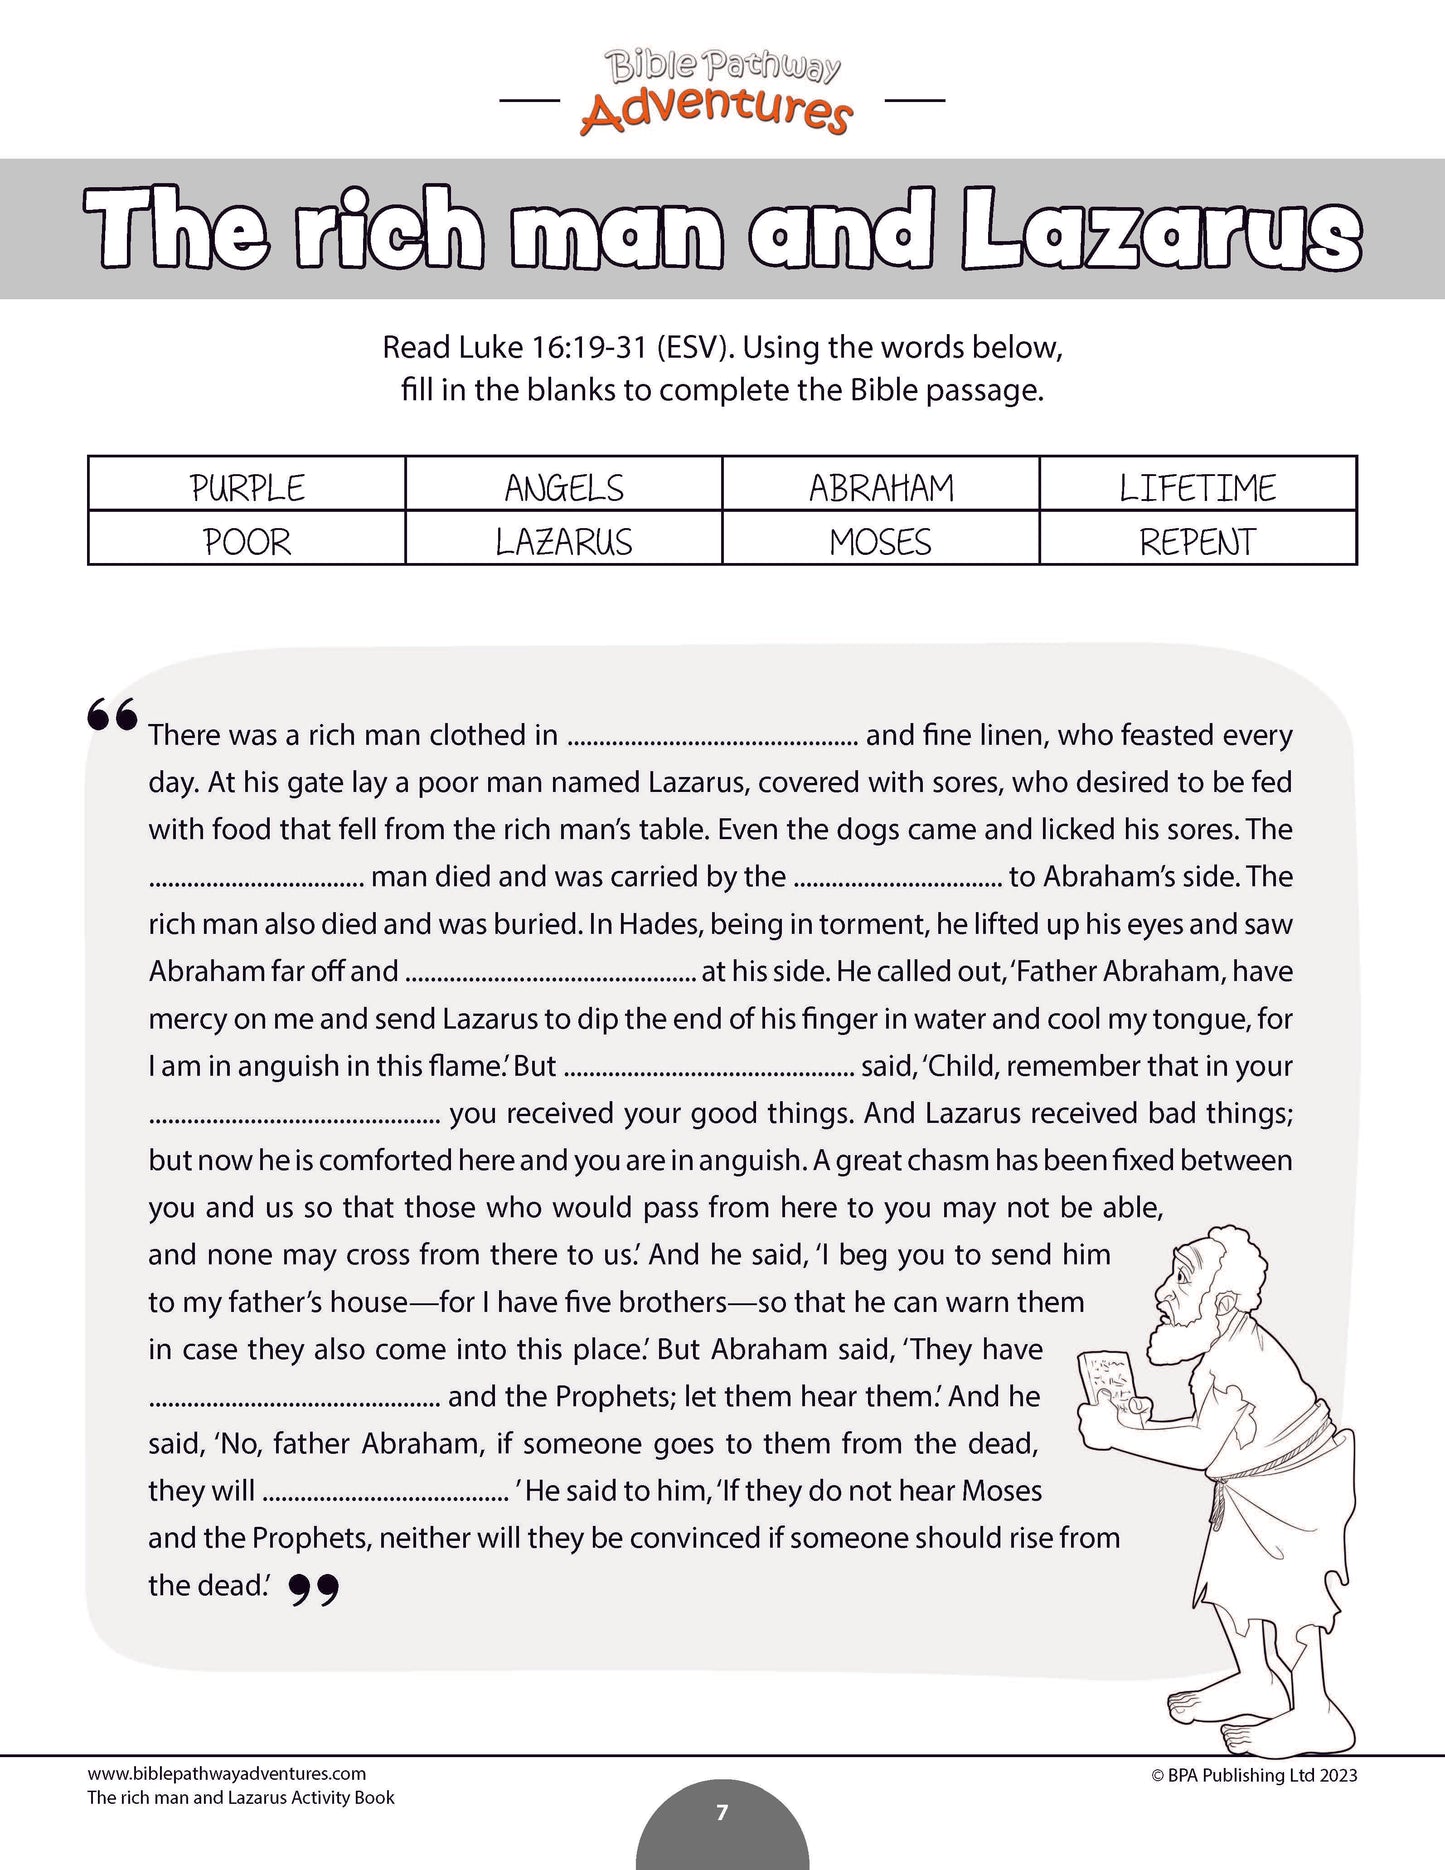 Parable of the Rich Man and Lazarus Activity Book